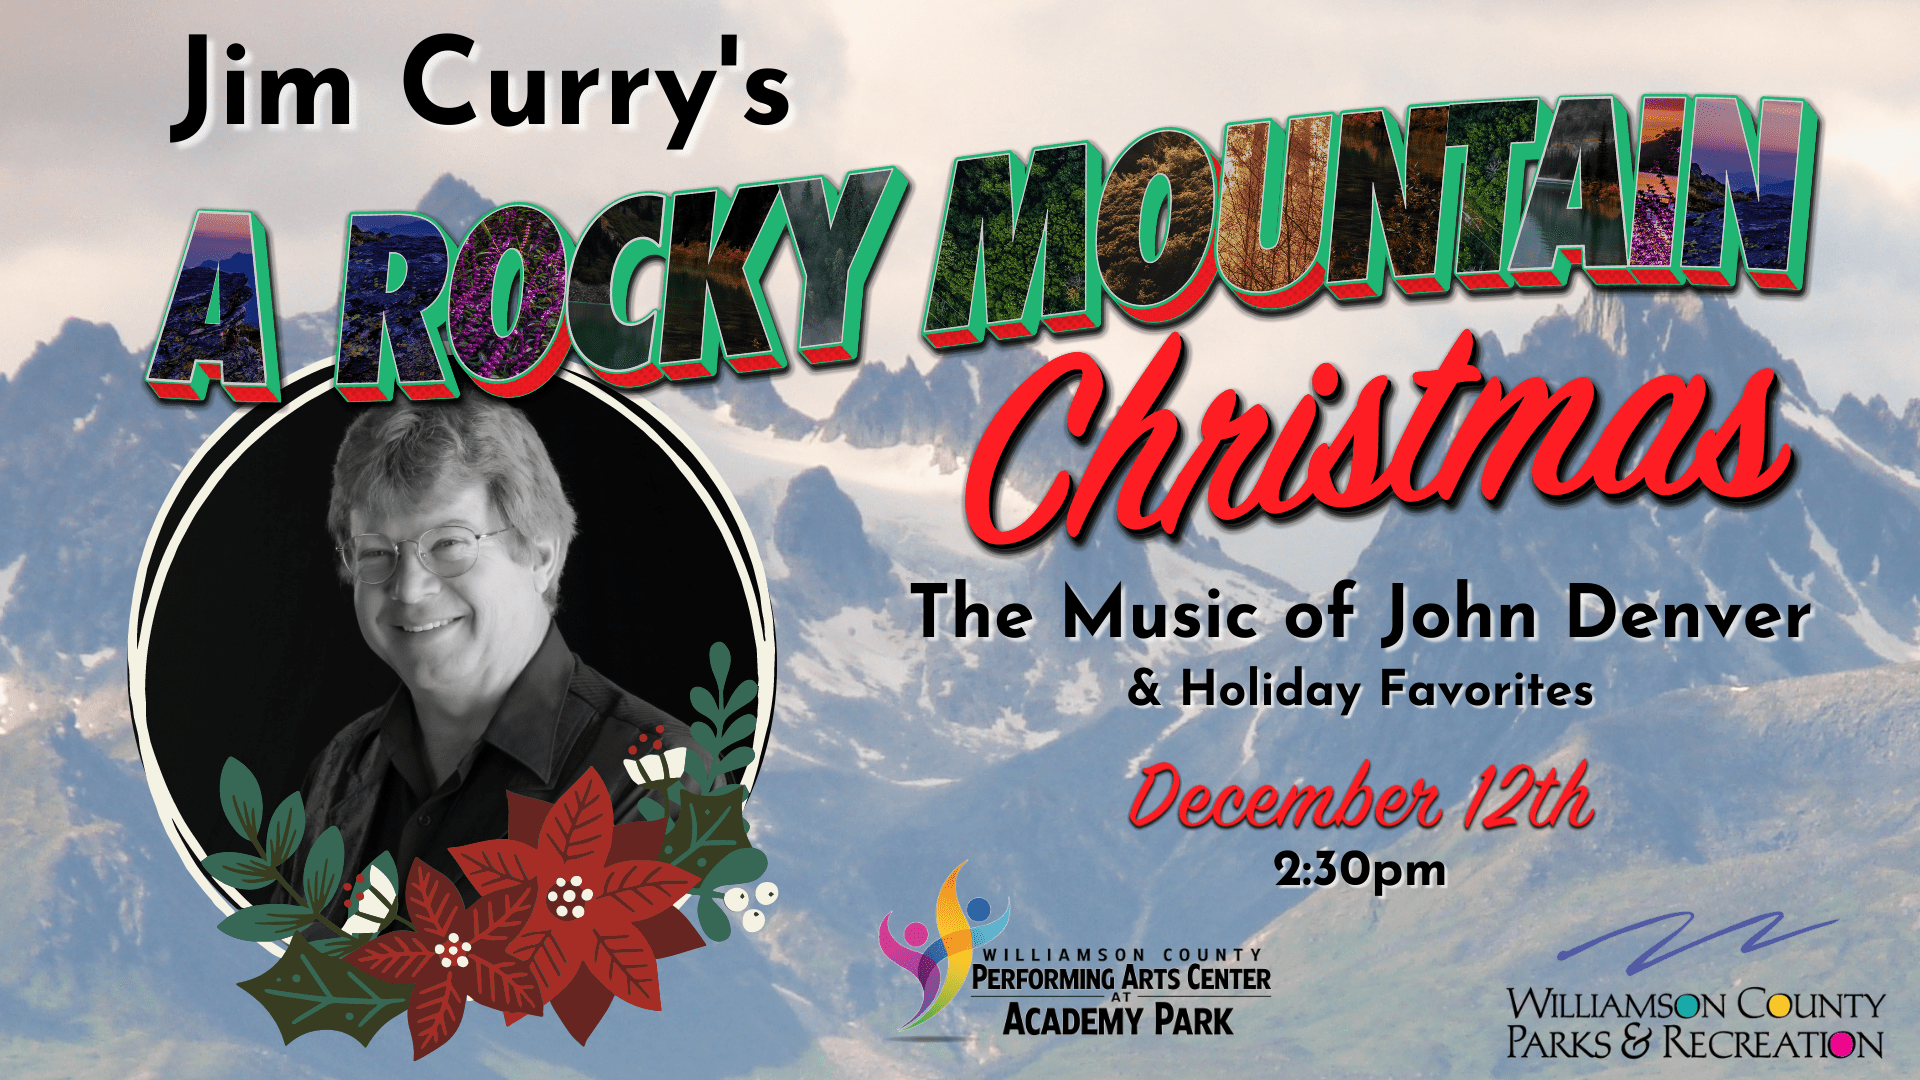 A Rocky Mountain Christmas, a Franklin TN event, Jim Curry will be performing at the Williamson County Performing Arts Center with a special holiday show!